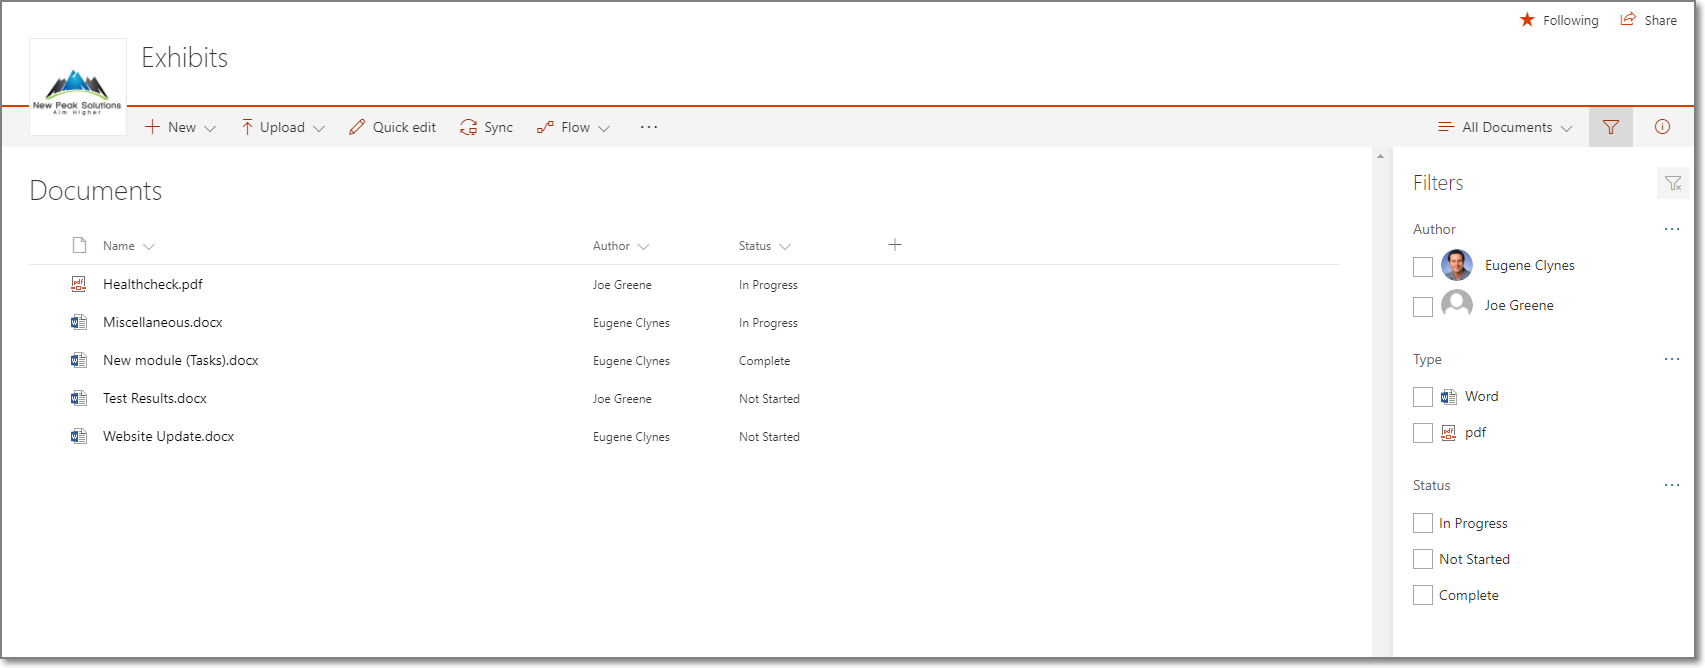 SharePoint Filters Pane